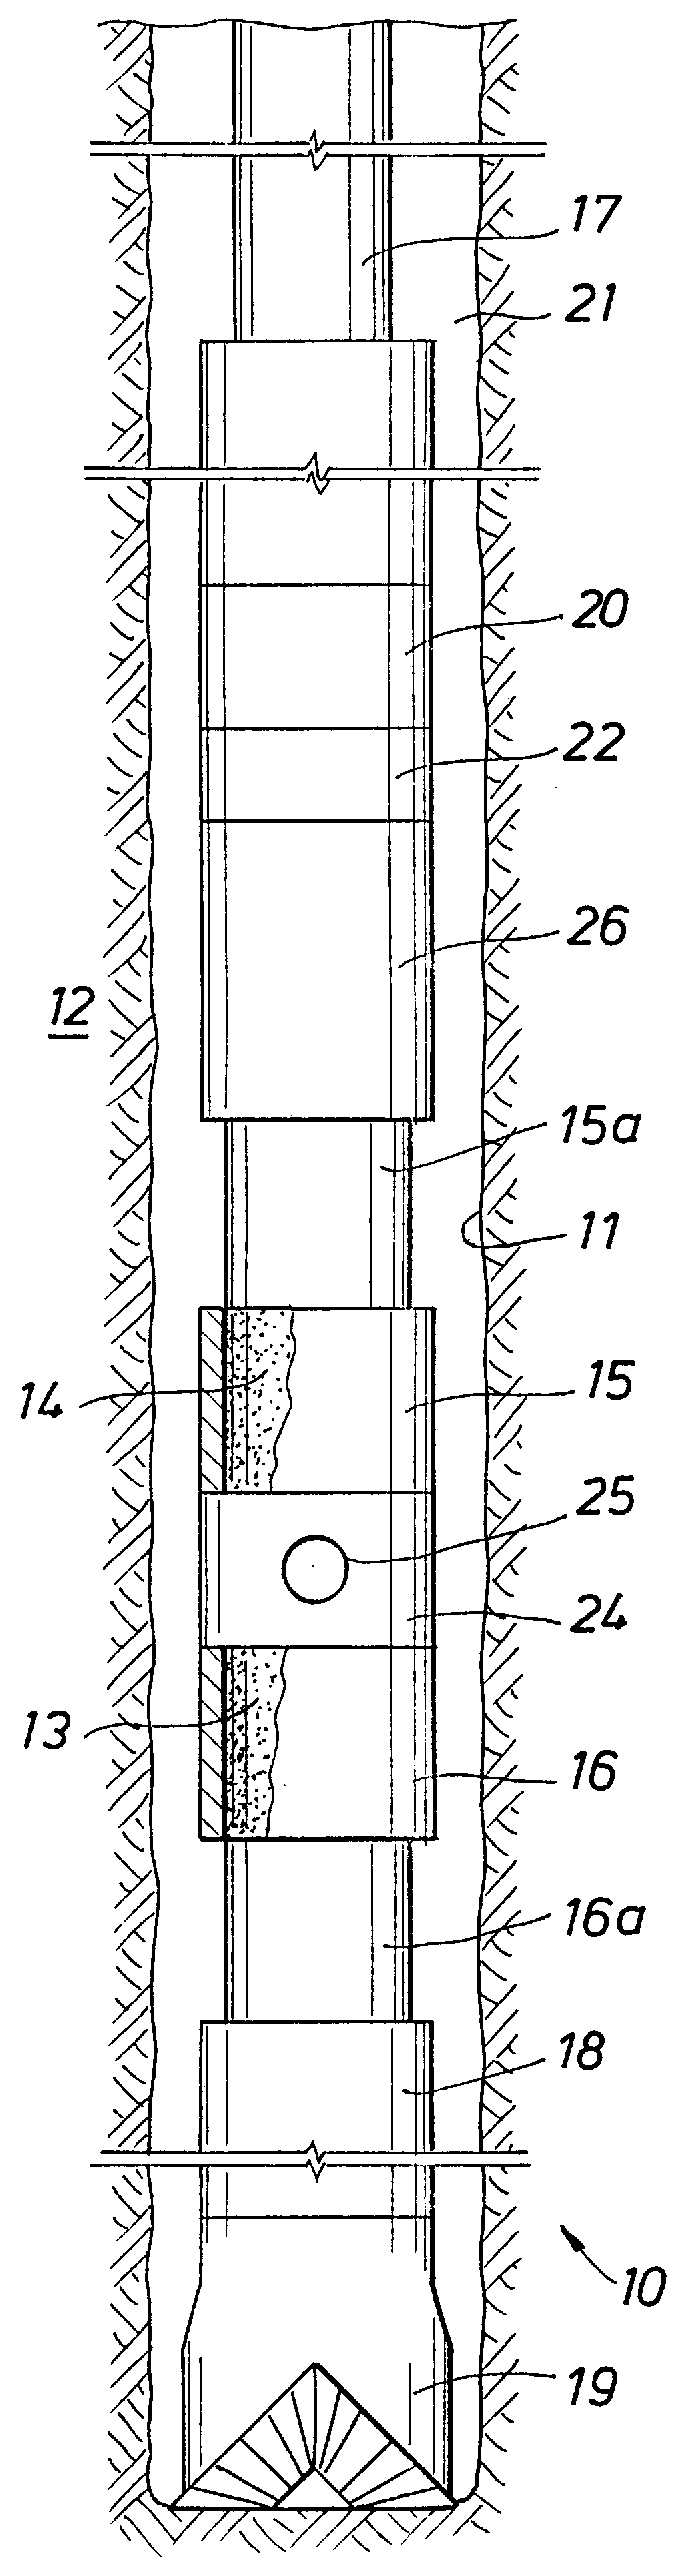 Subsurface measurement apparatus, system, and process for improved well drilling control and production